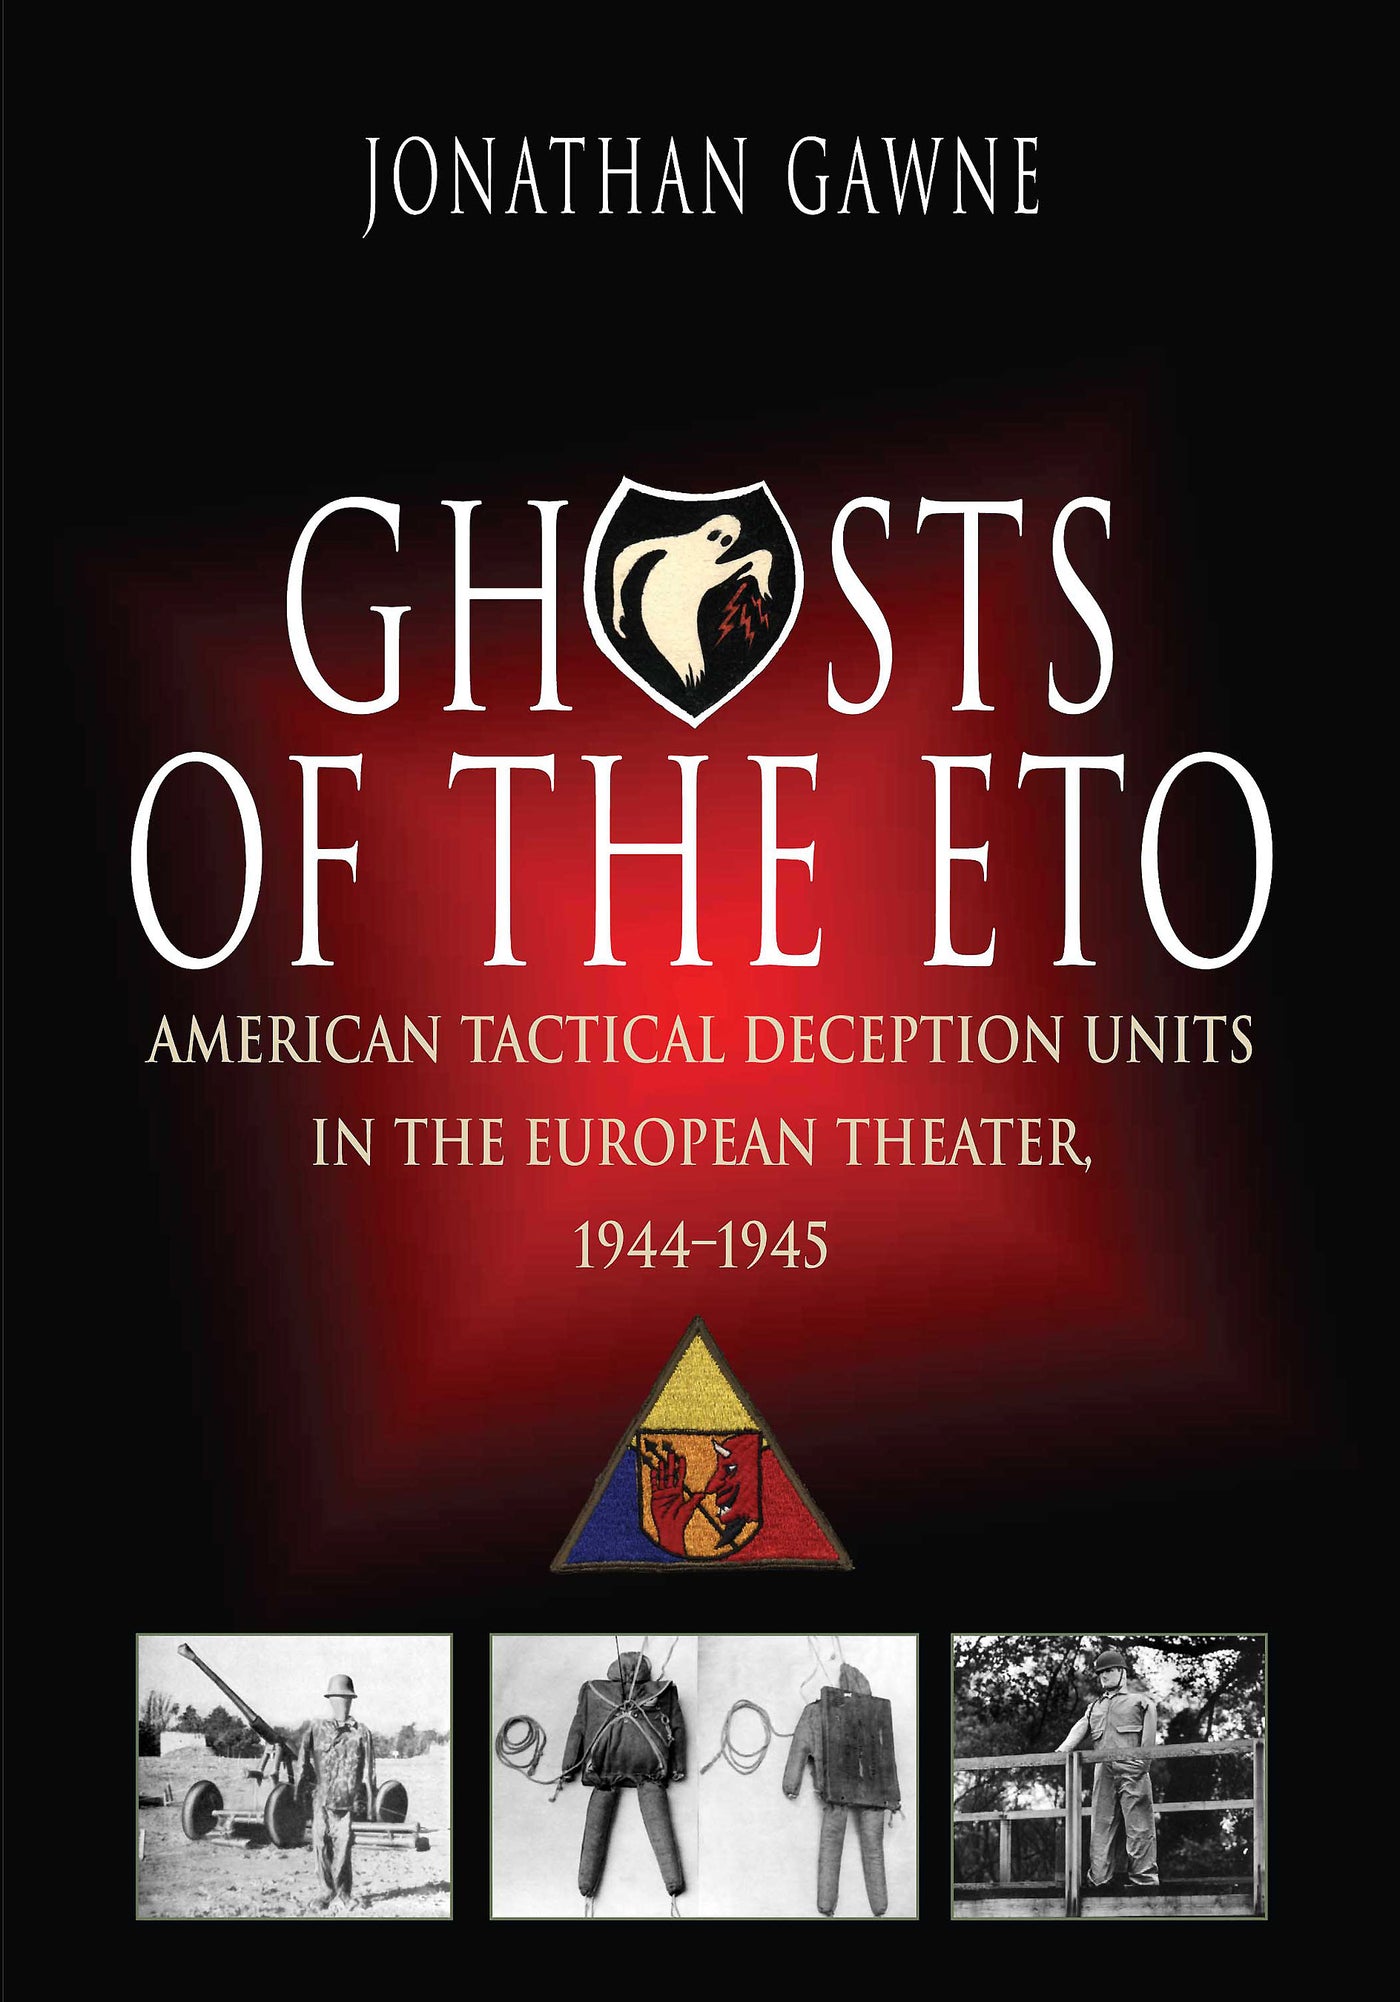 Ghosts of the ETO